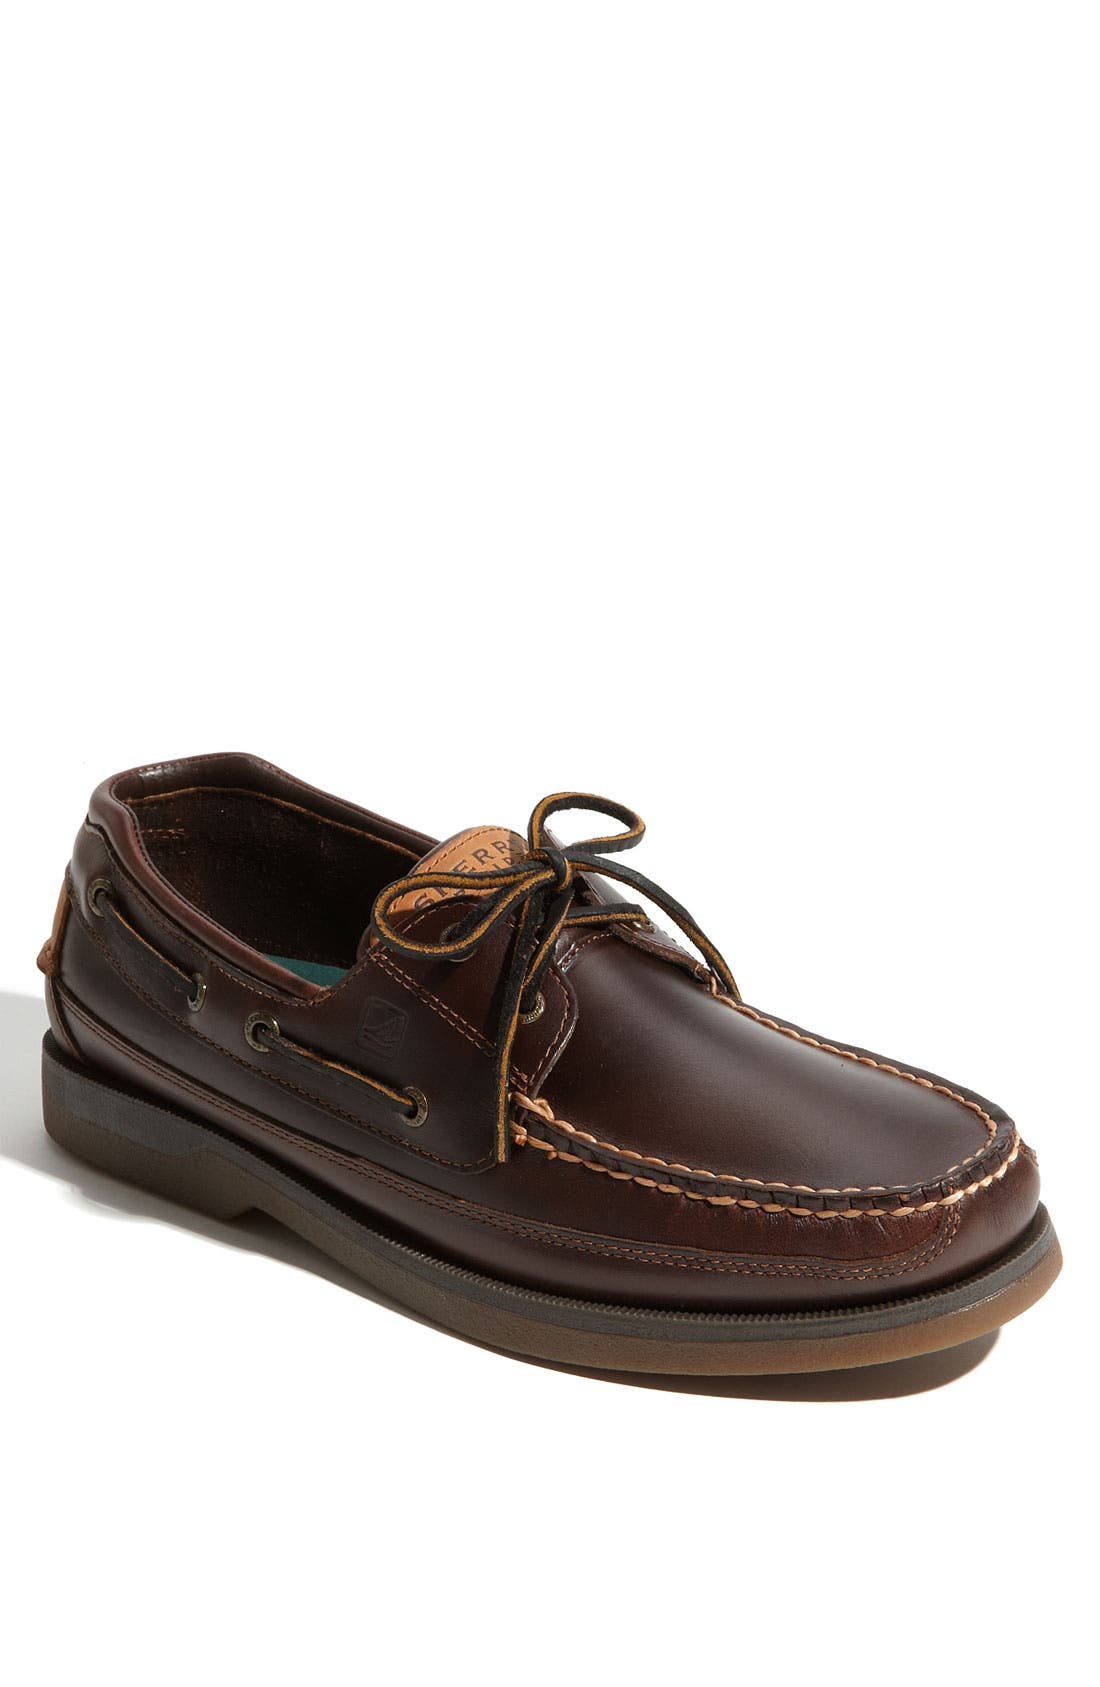 sperry boat shoes nordstrom